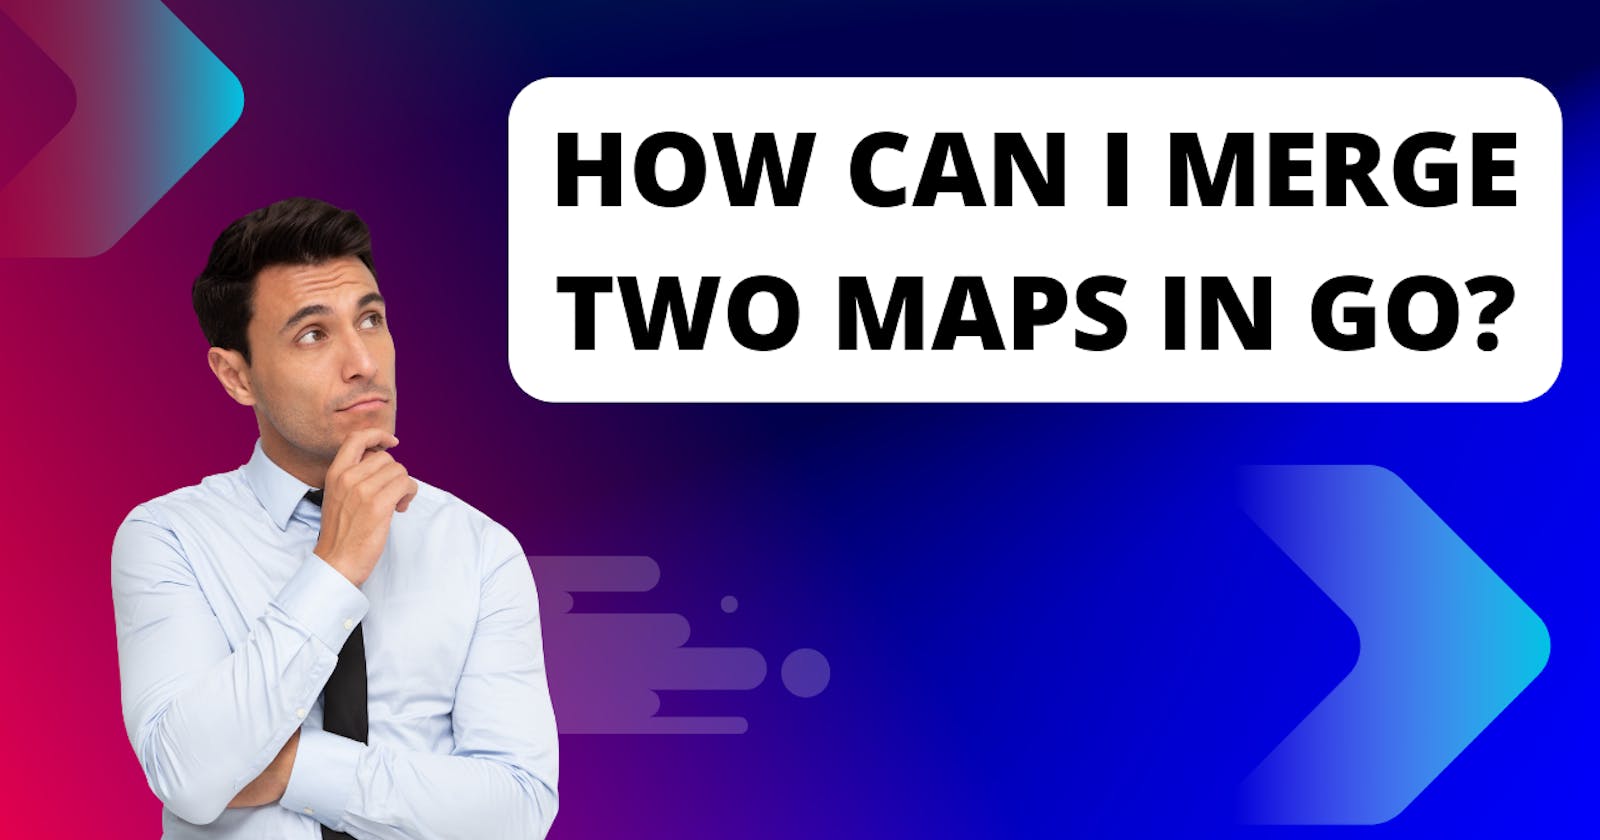 How can I merge two maps in go?